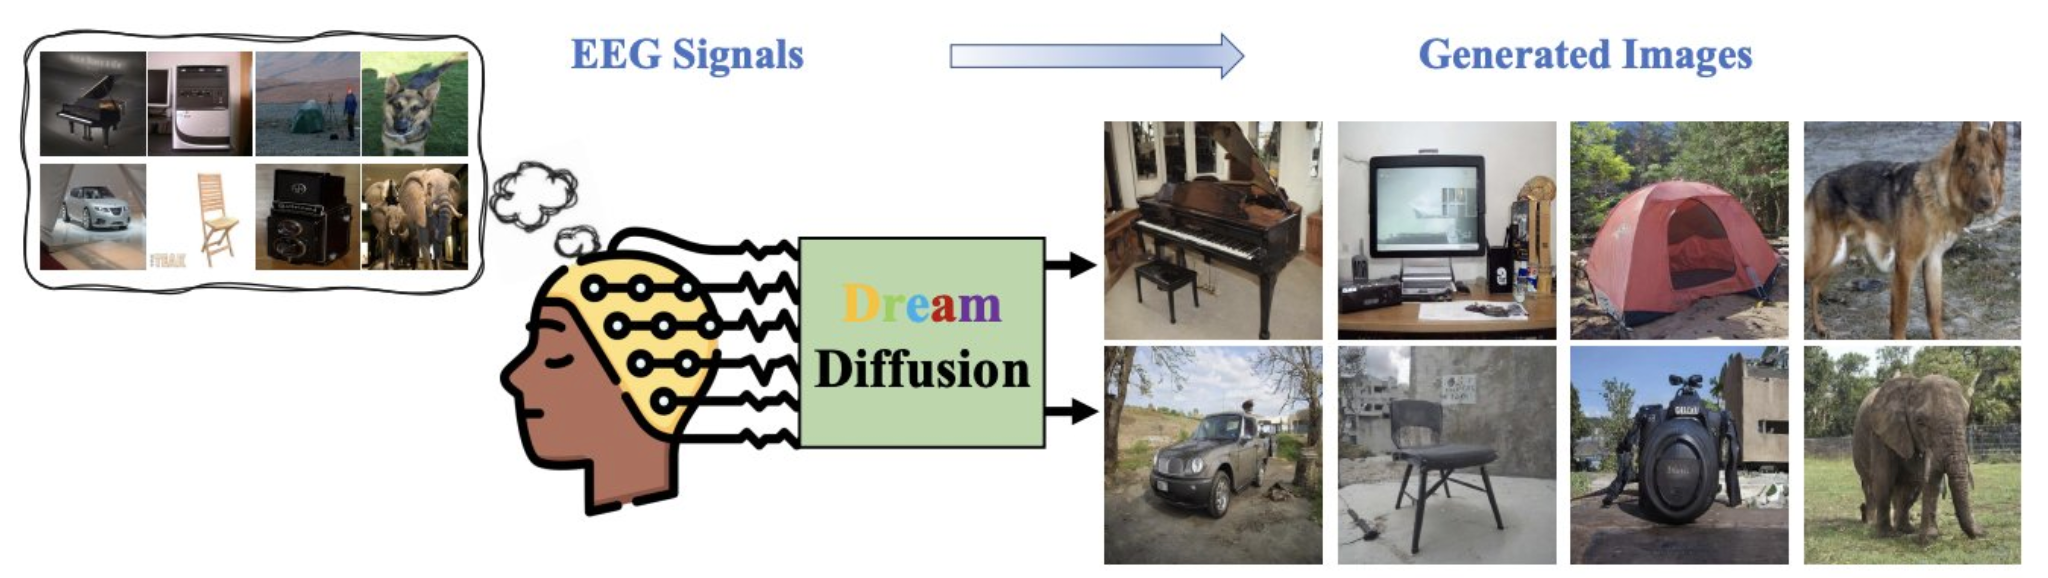 DreamDiffusion at arxiv.org, Computer Vision and Pattern Recognition.